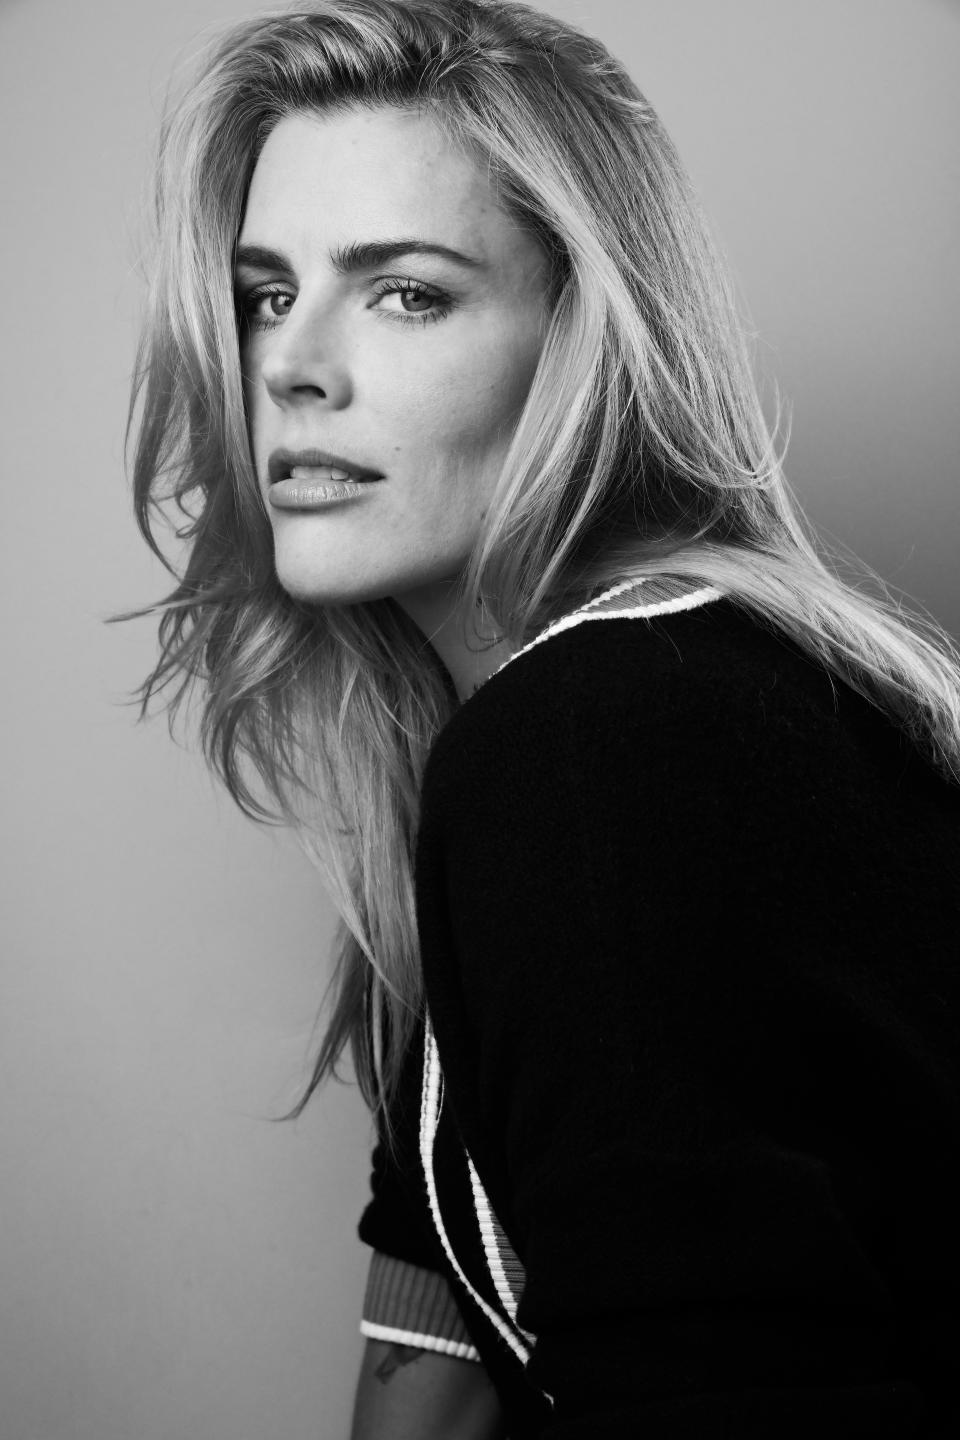 Busy Philipps (pictured) was actually first diagnosed with ADHD as a kid, though no one in her family remembers.